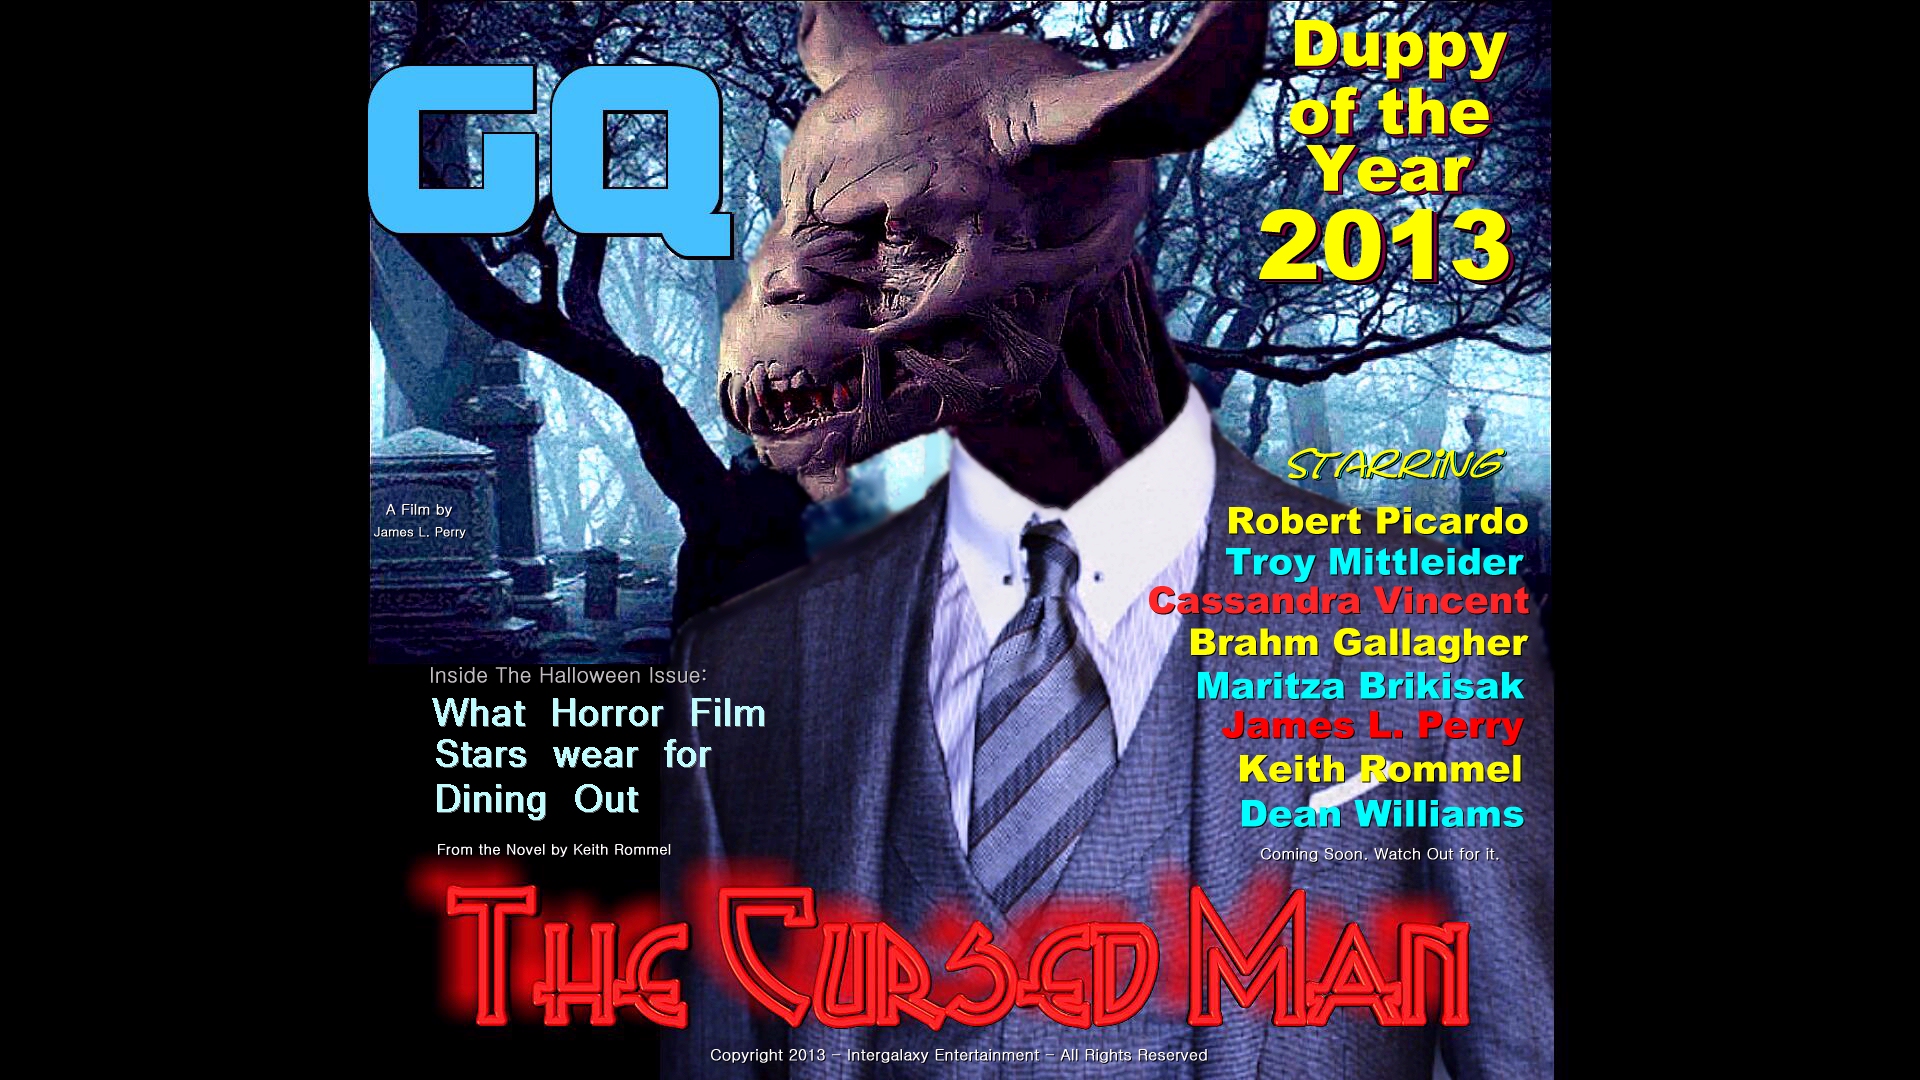 Parody of magazine cover featuring The Cursed Man, Duppy of the Year 2013. The first horror movie monster with a eye for fashion and color coordination